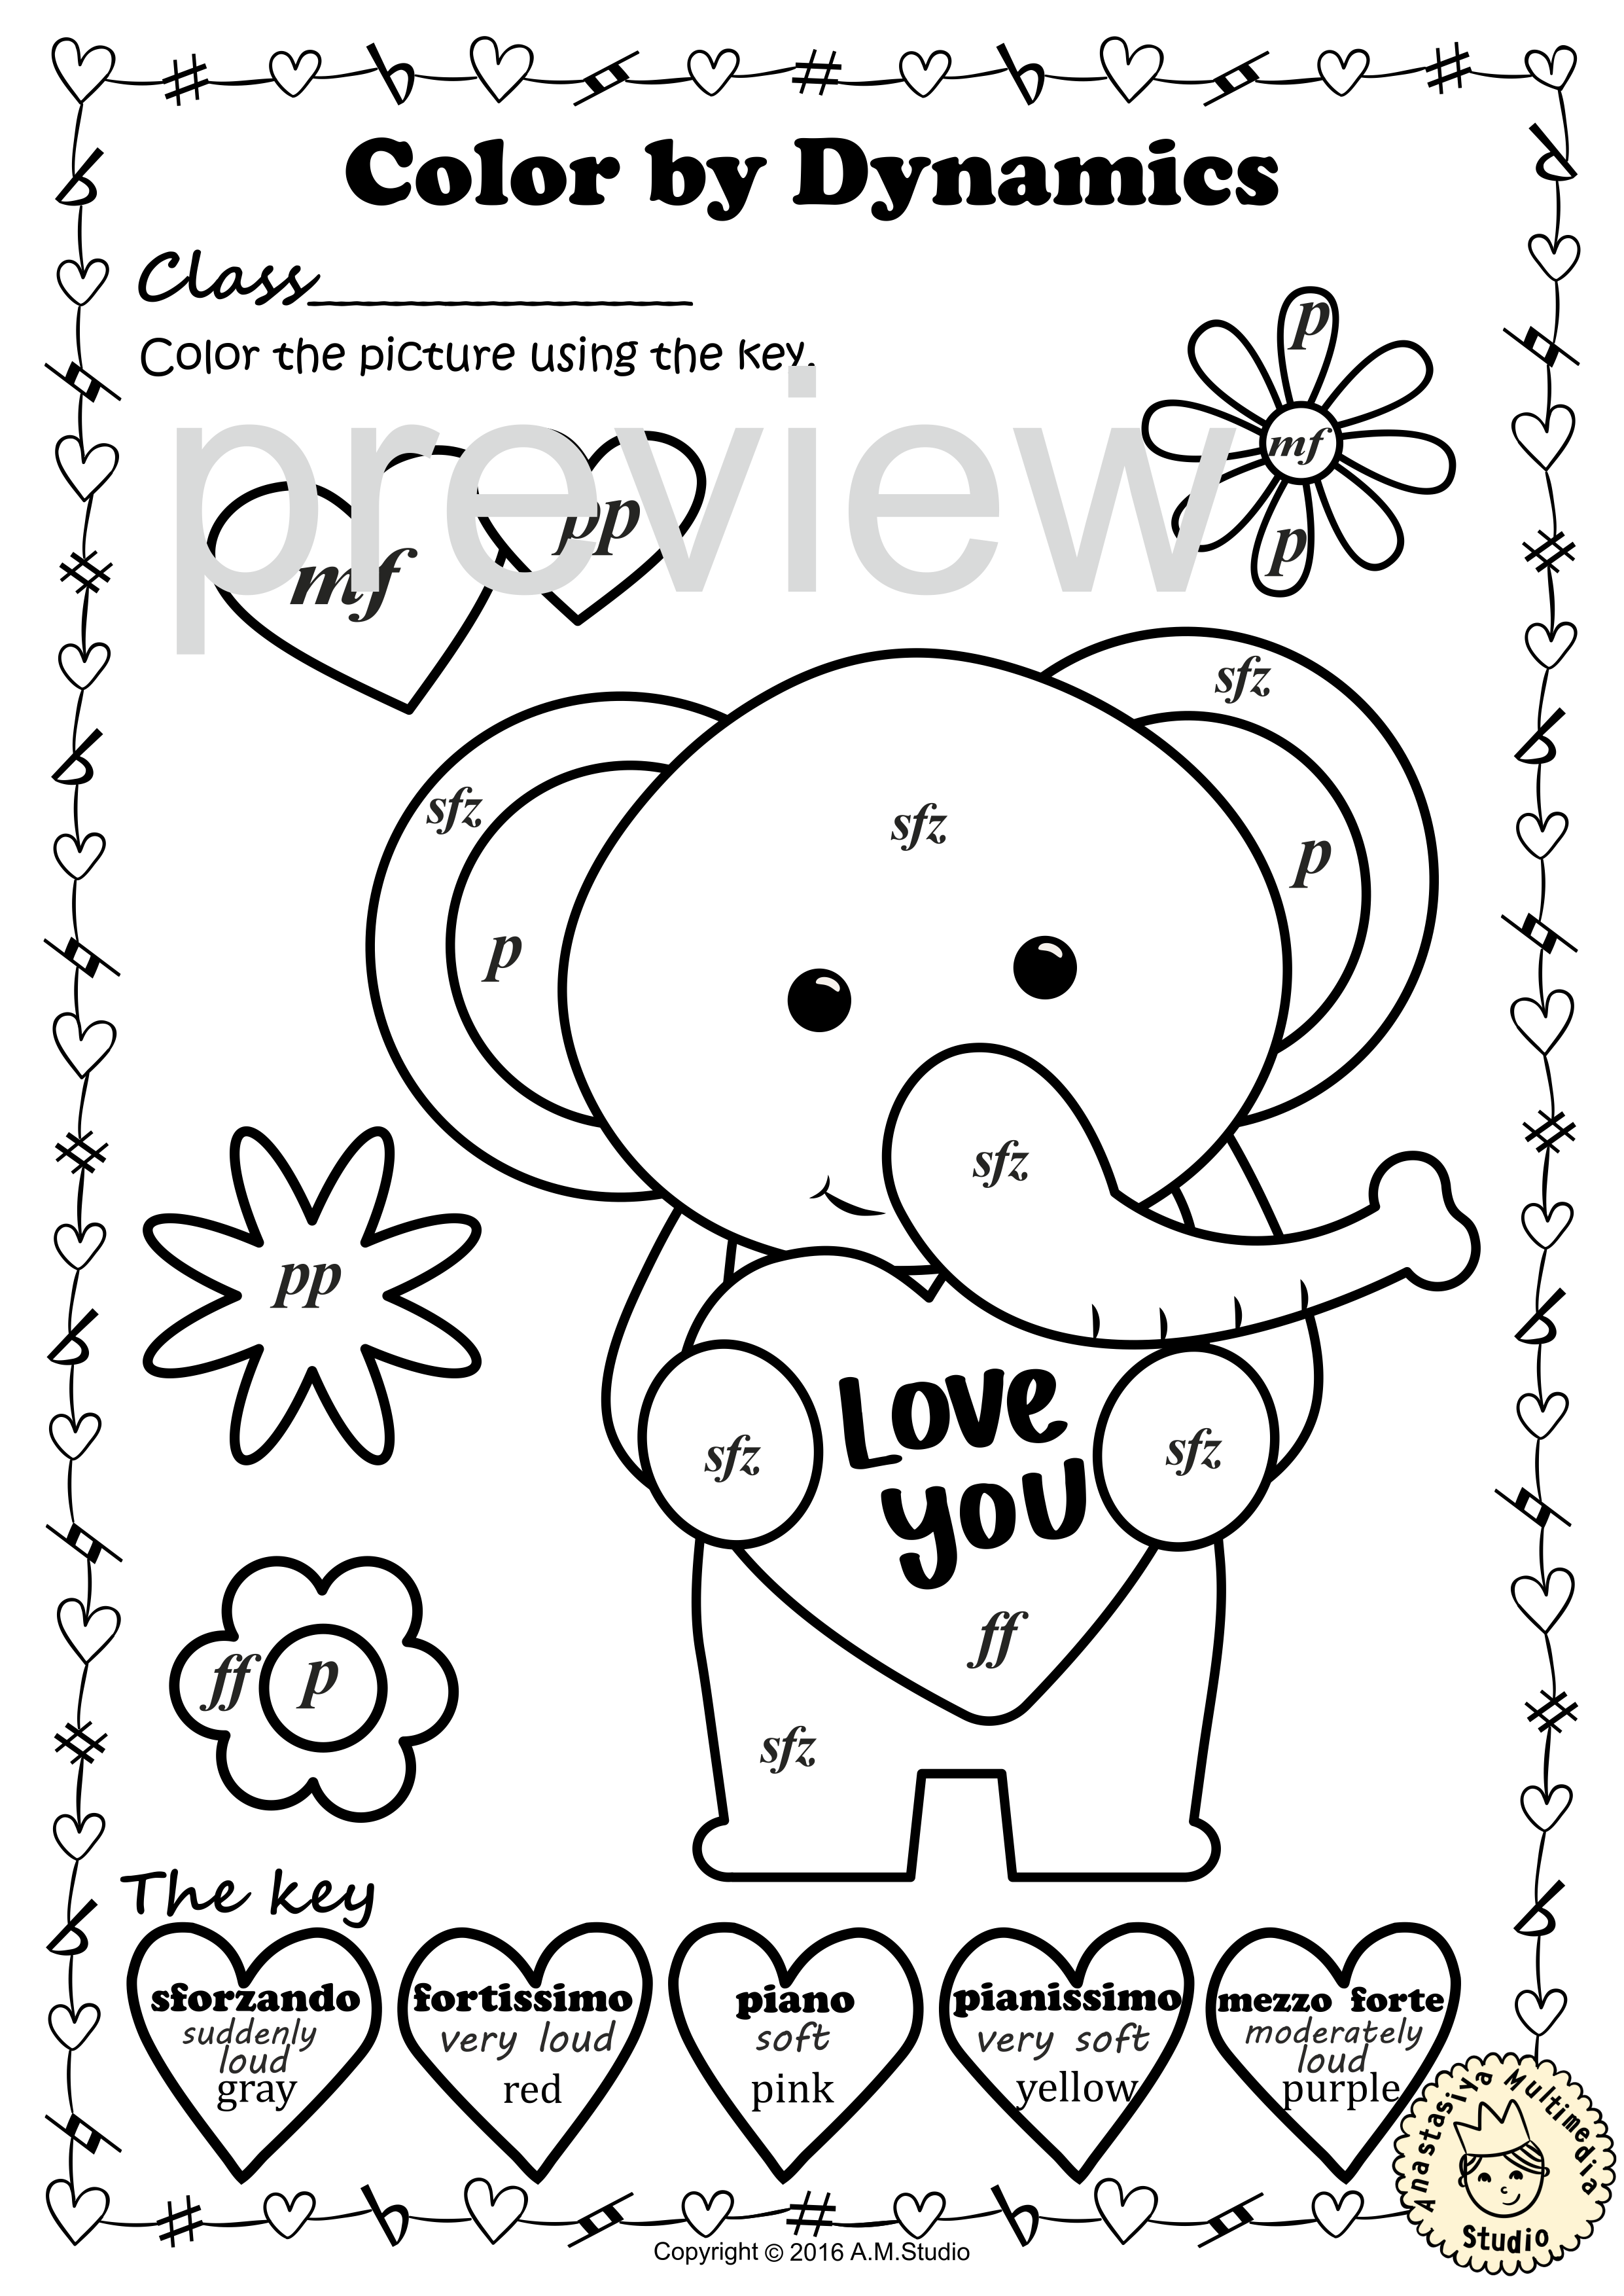 Valentines day music coloring pages color by dynamics made by teachers